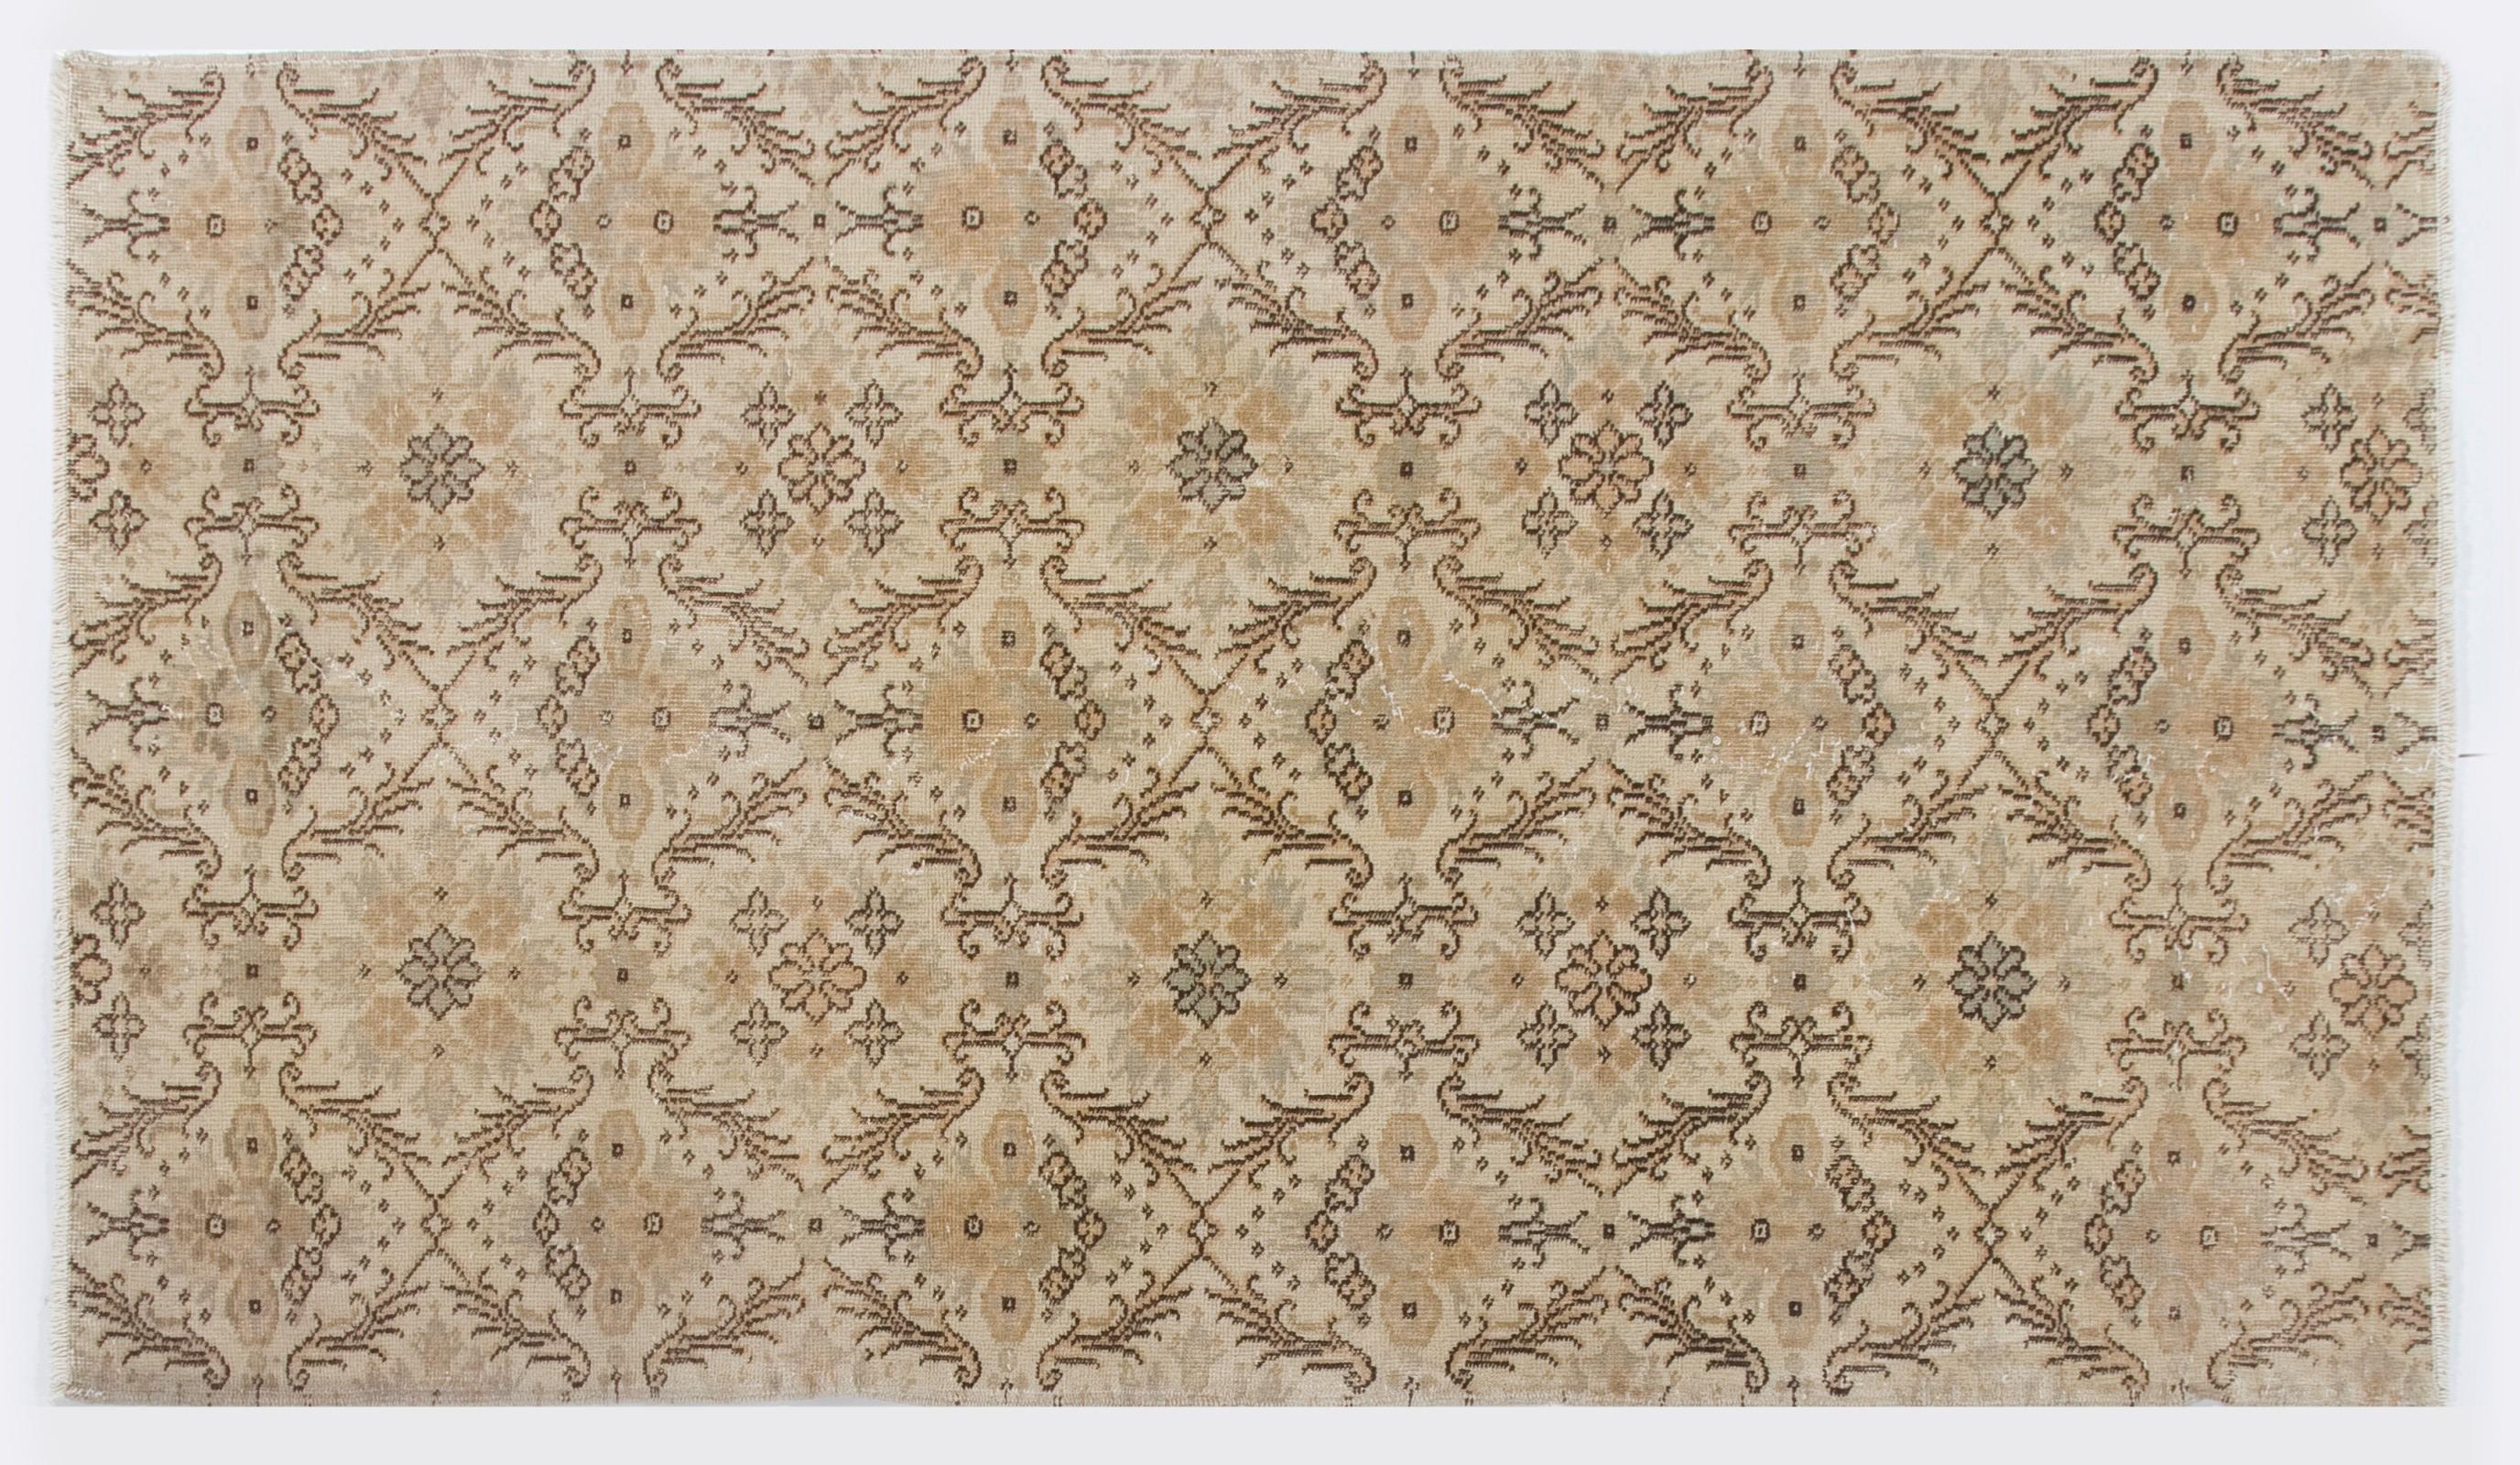 Hand-Knotted 4.2x7.5 ft Decorative Vintage Handmade Anatolian Accent Rug with Floral Design For Sale